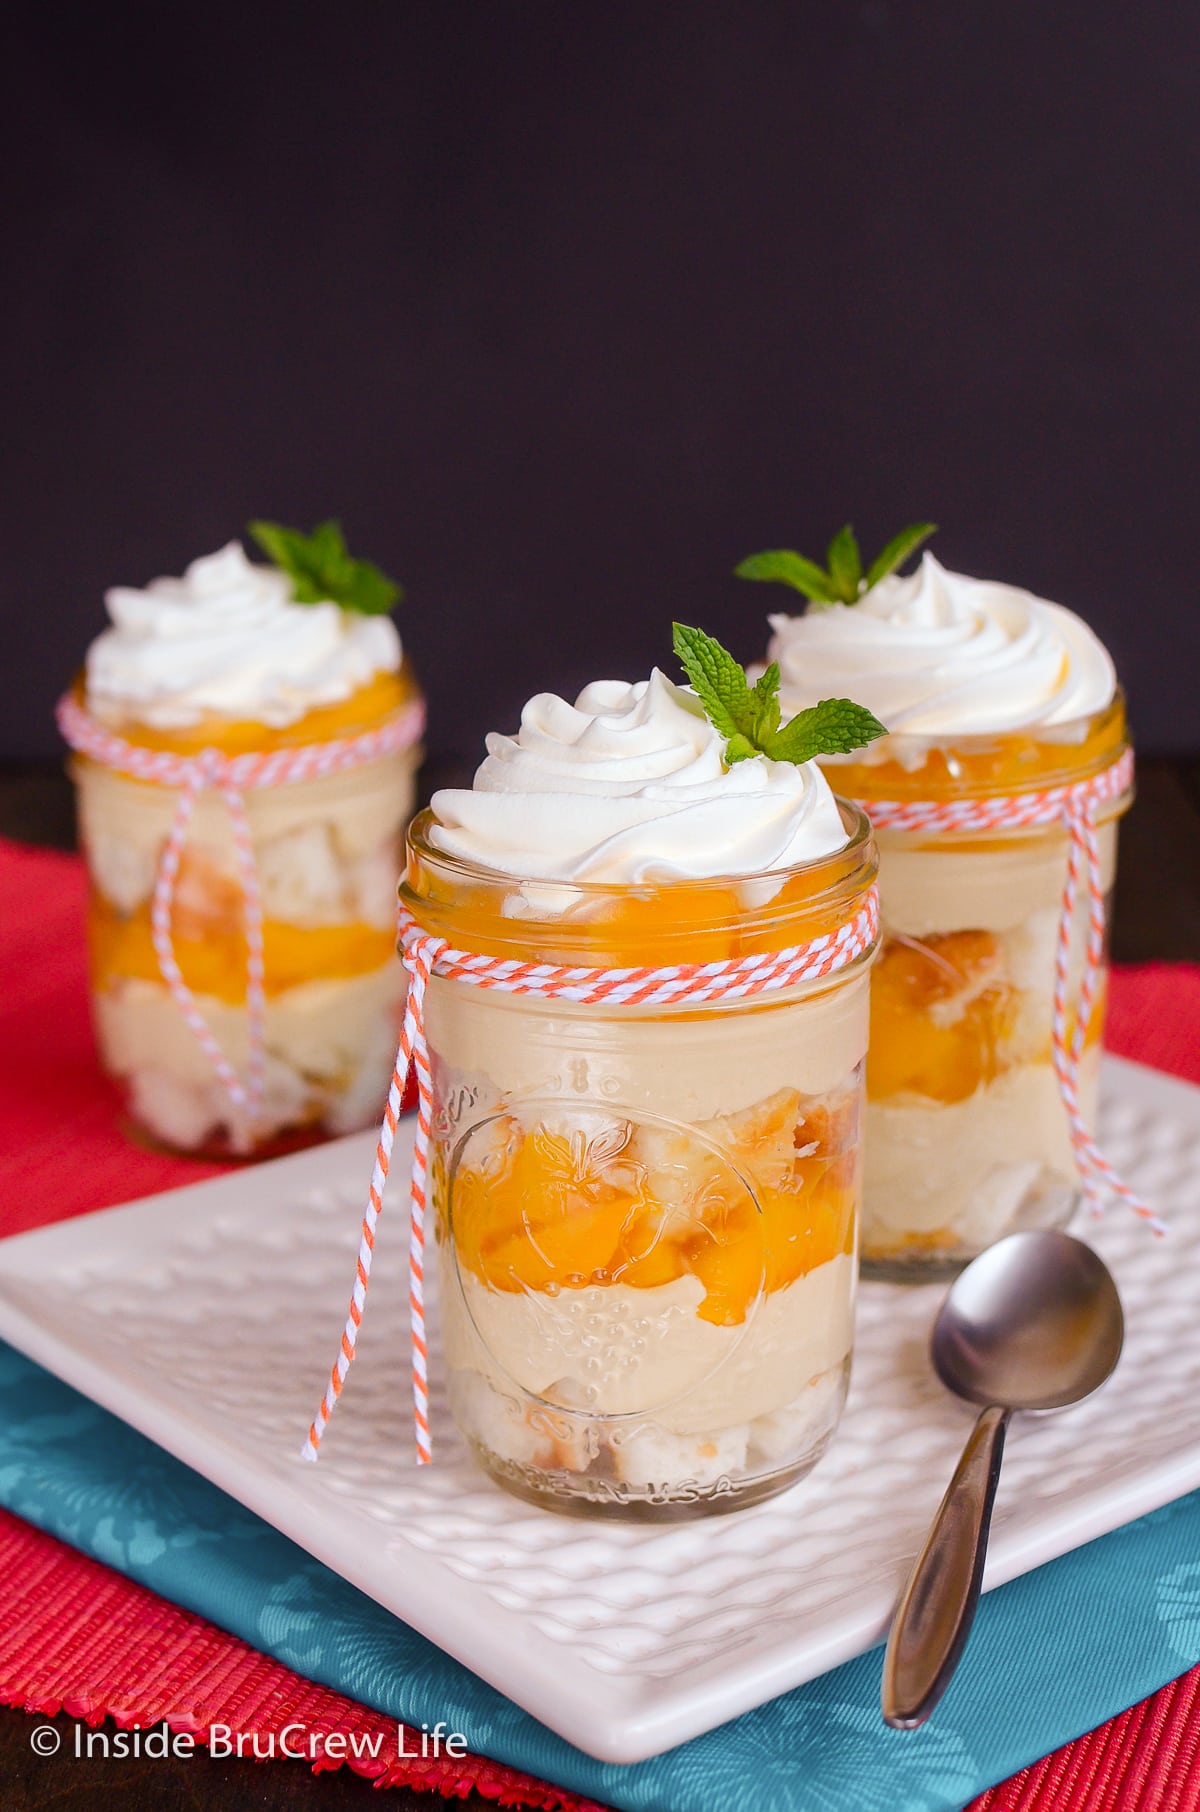 Three cheesecake dessert cups layered with pie filling.